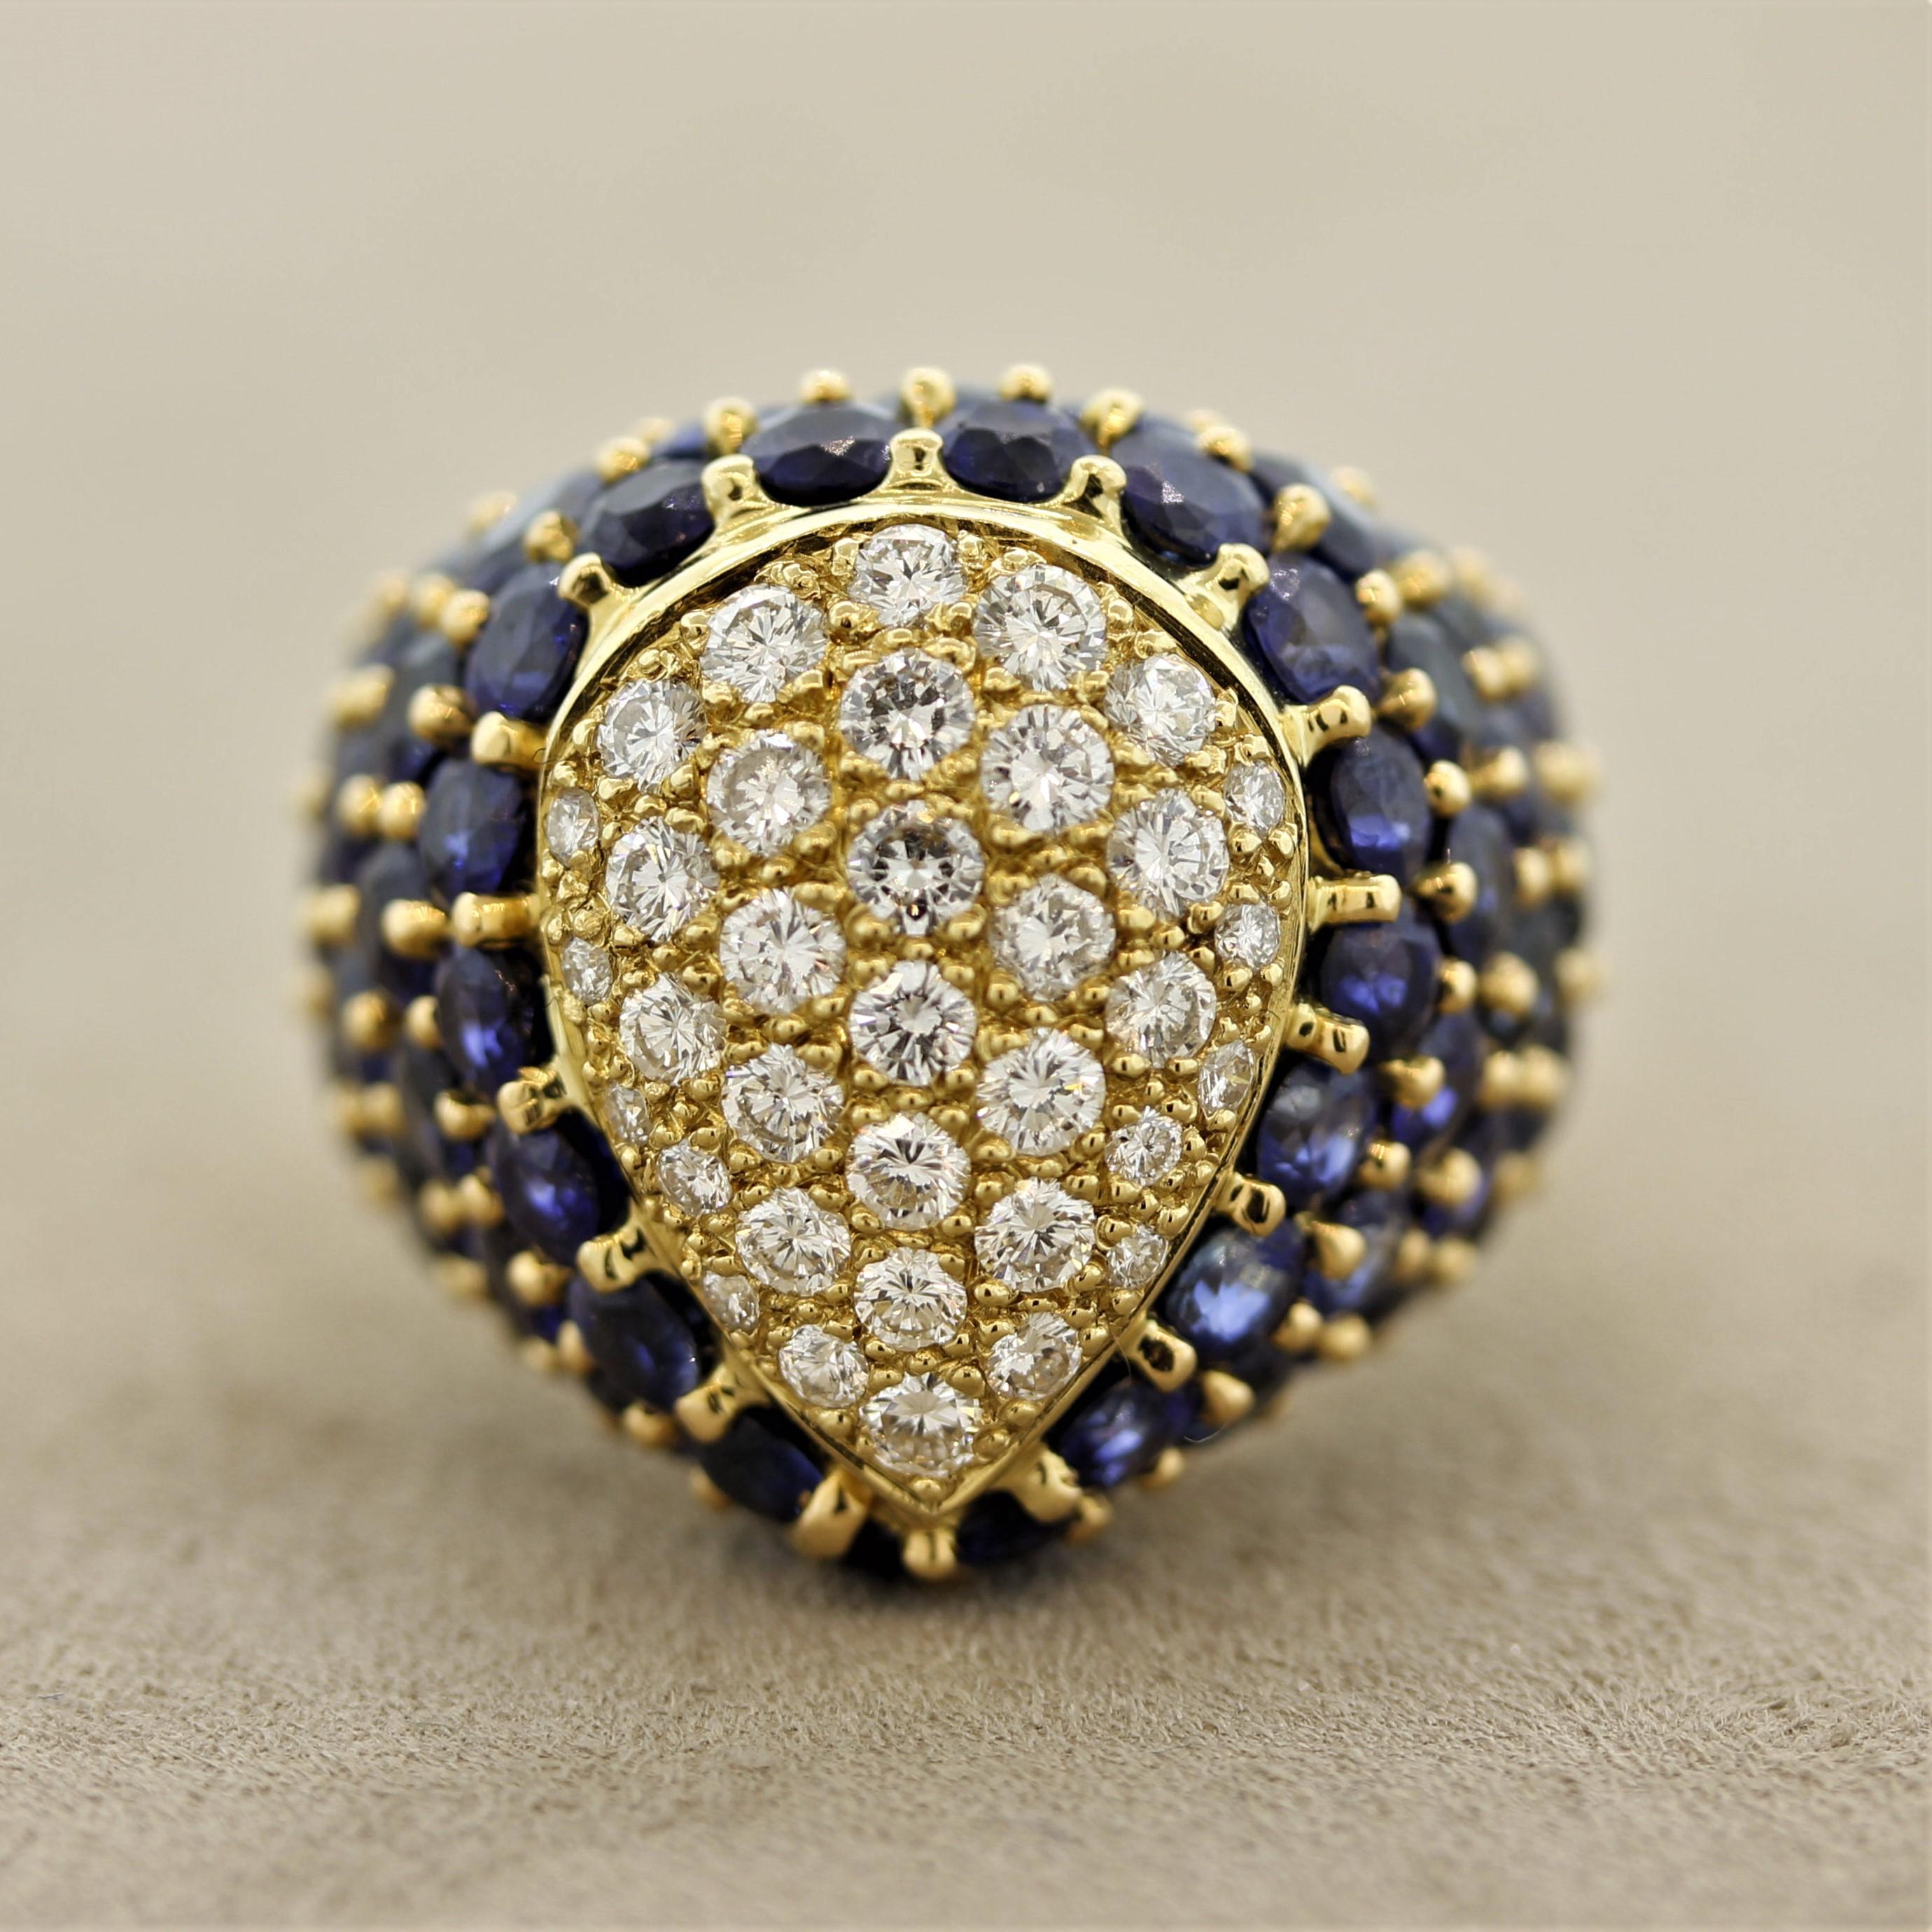 A lovely domed Bombay style French ring featuring 0.75 carats of round brilliant-cut diamonds along with 10 carats of bright blue sapphire. Made with 18k yellow gold in France, a lovely quality piece.

Ring Size 5.25